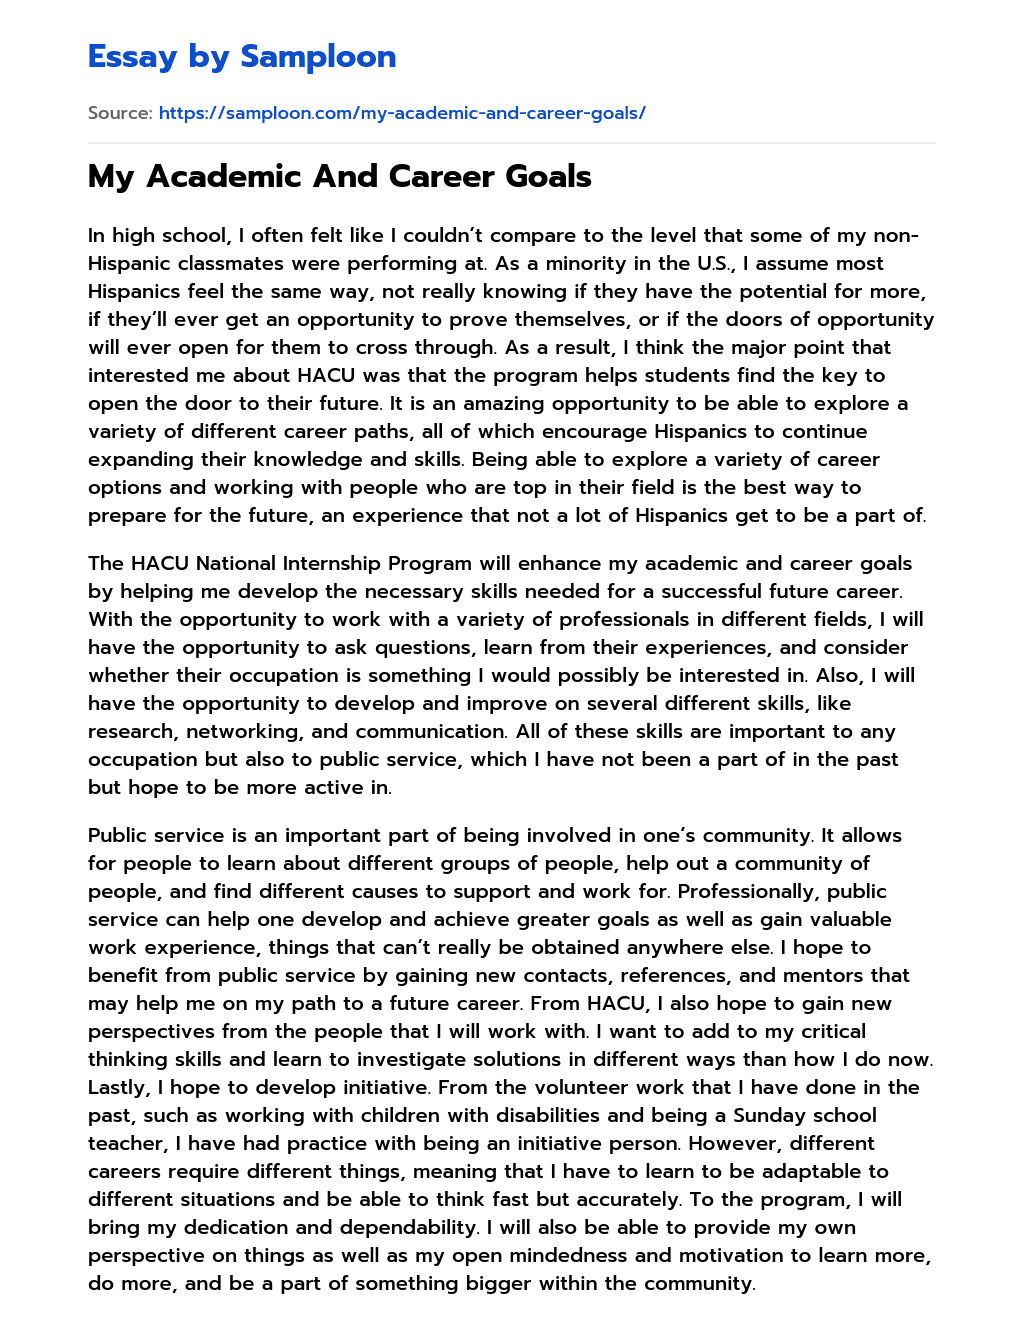 My Academic And Career Goals essay